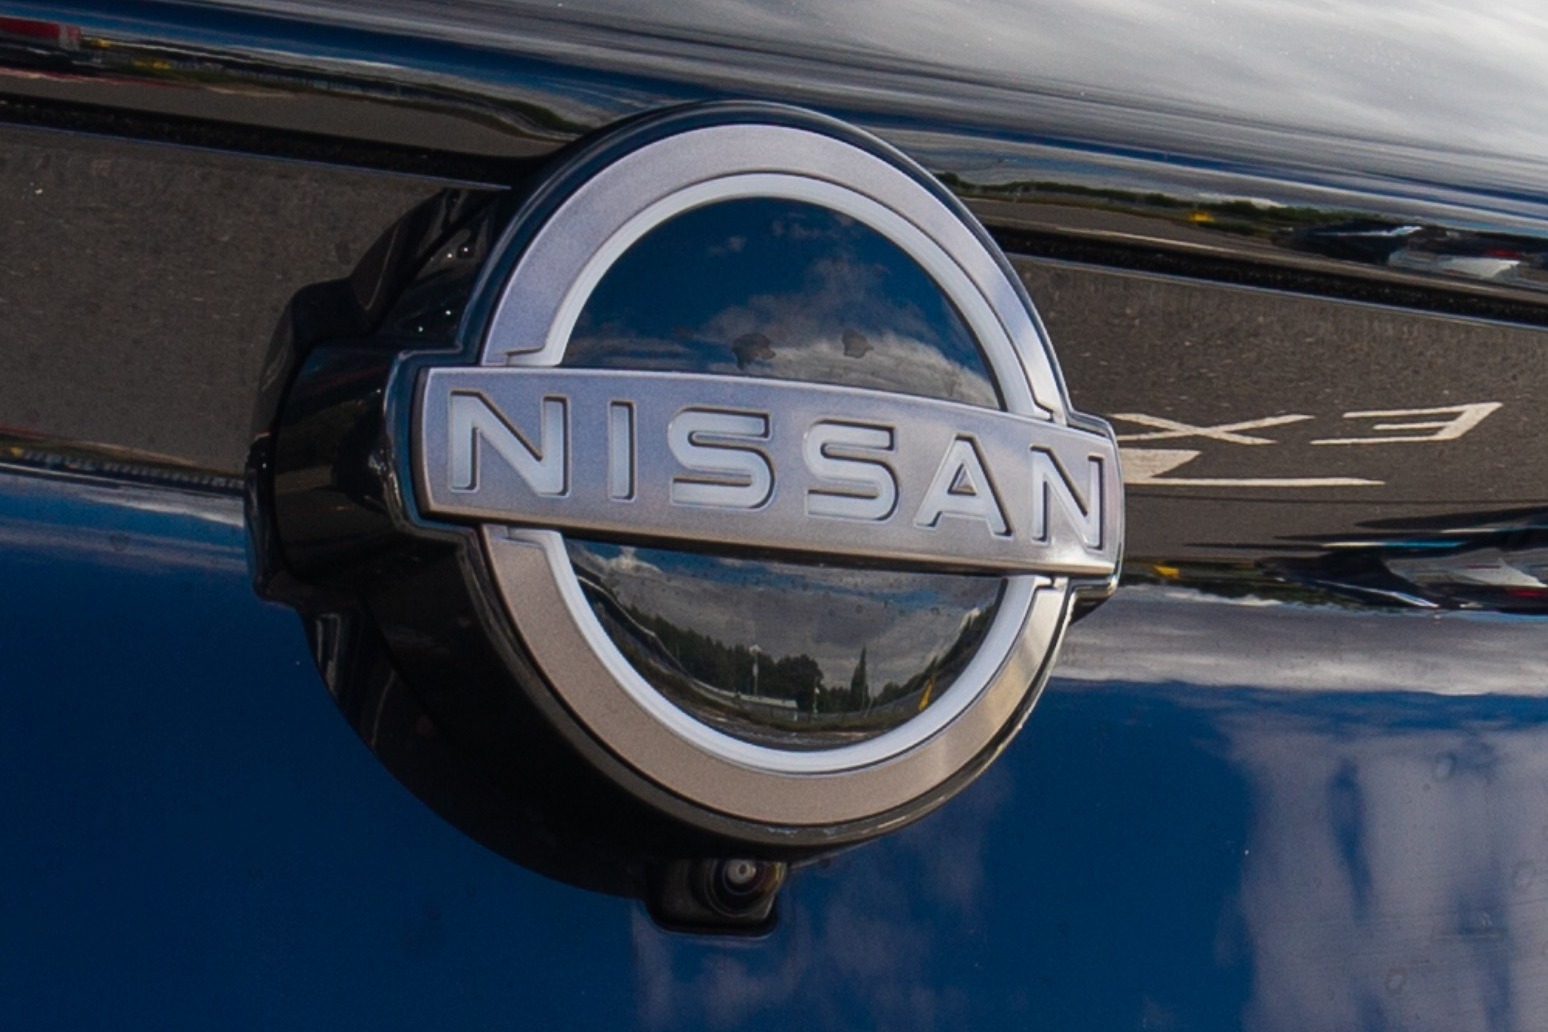 Nissan’s Qashqai takes the title as UK’s best-selling car of 2022 